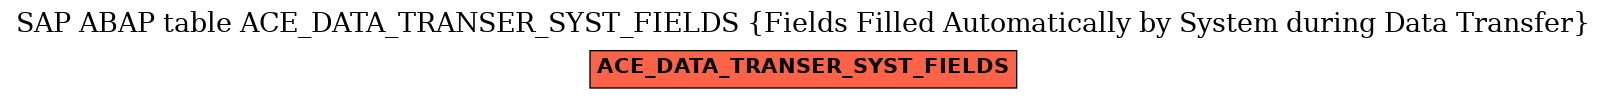 E-R Diagram for table ACE_DATA_TRANSER_SYST_FIELDS (Fields Filled Automatically by System during Data Transfer)